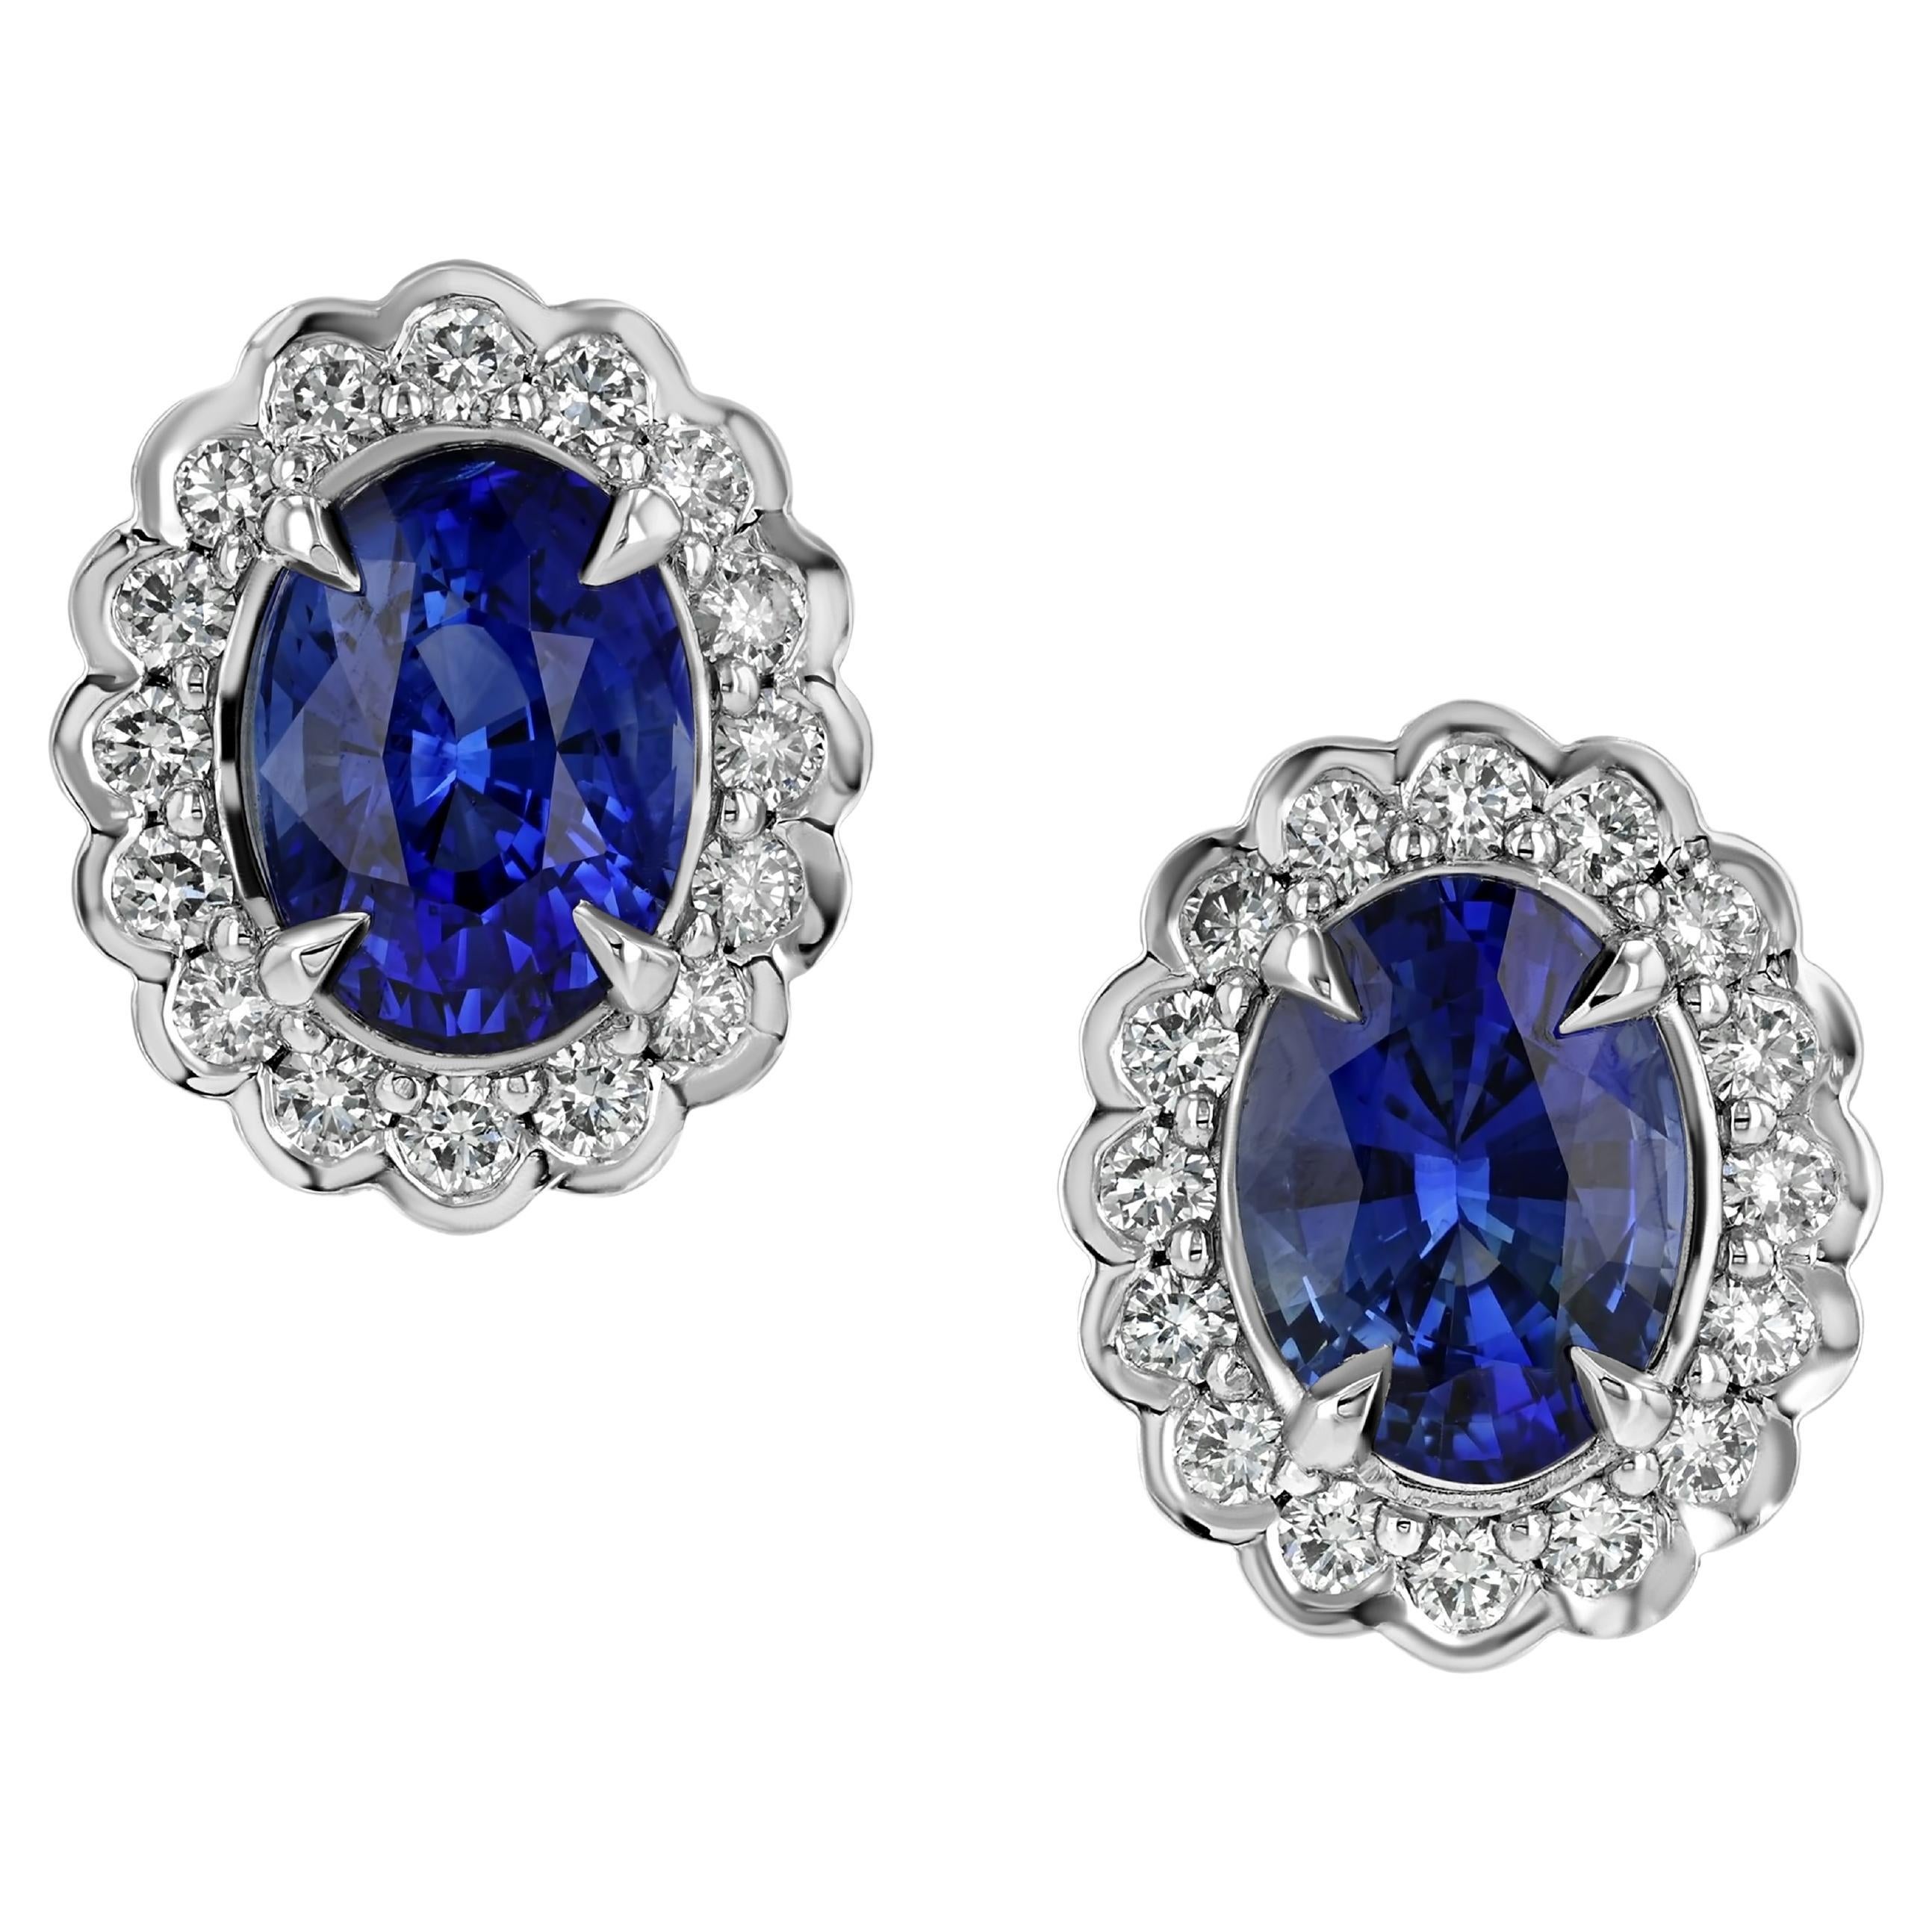 3.09ct GIA certified, Ceylon oval Blue Sapphire platinum earrings. For Sale